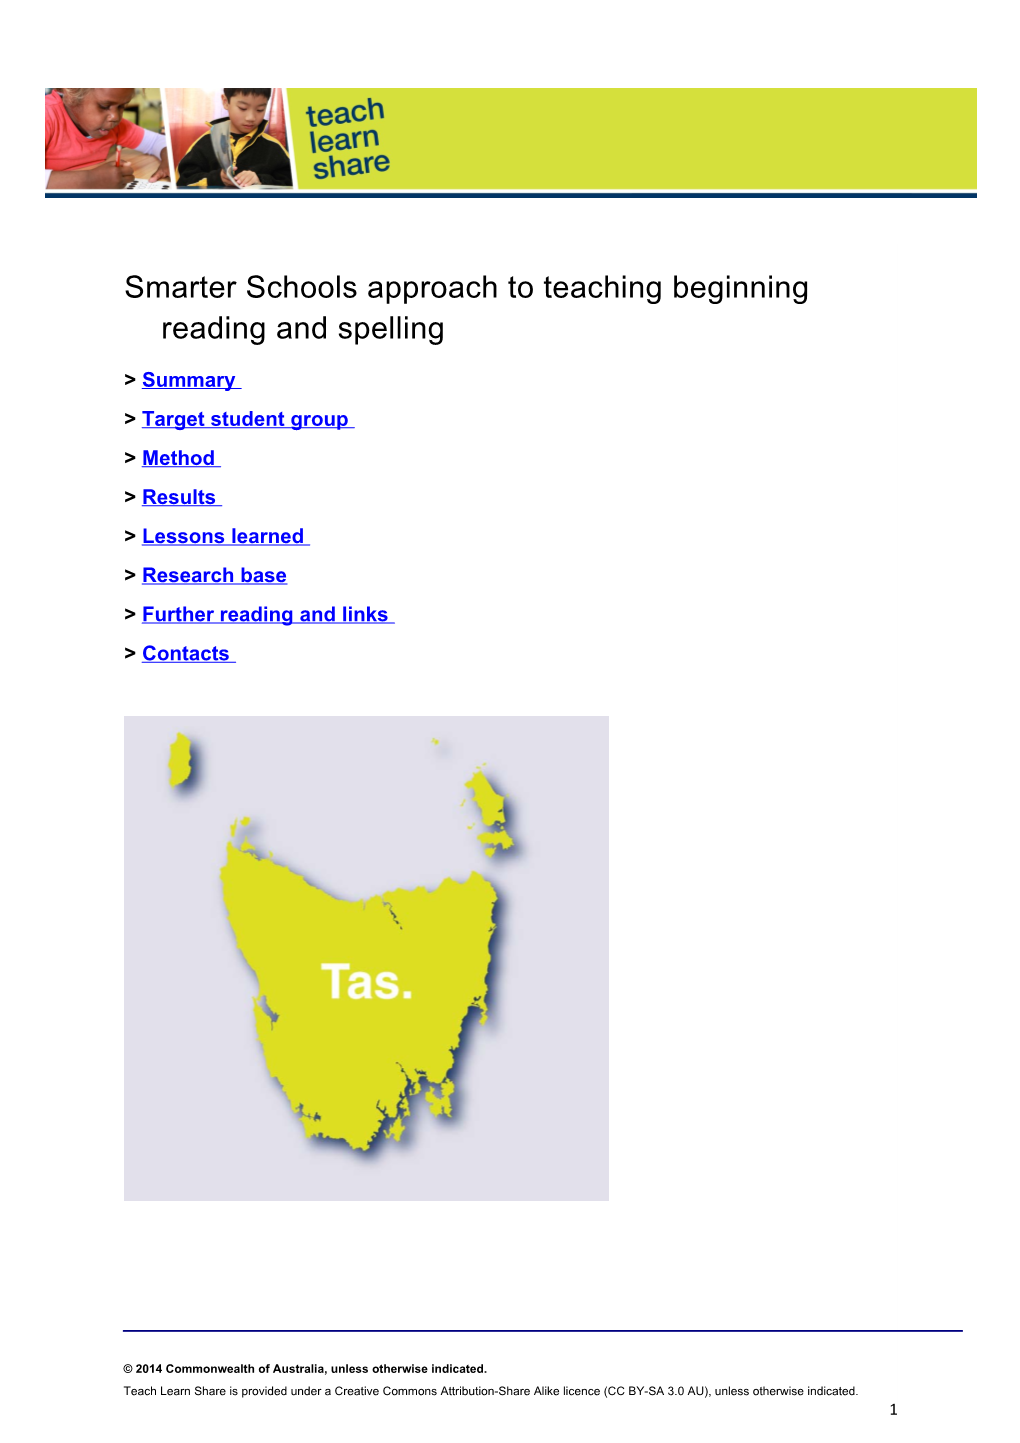 Smarter Schools Approach to Teaching Beginning Reading and Spelling